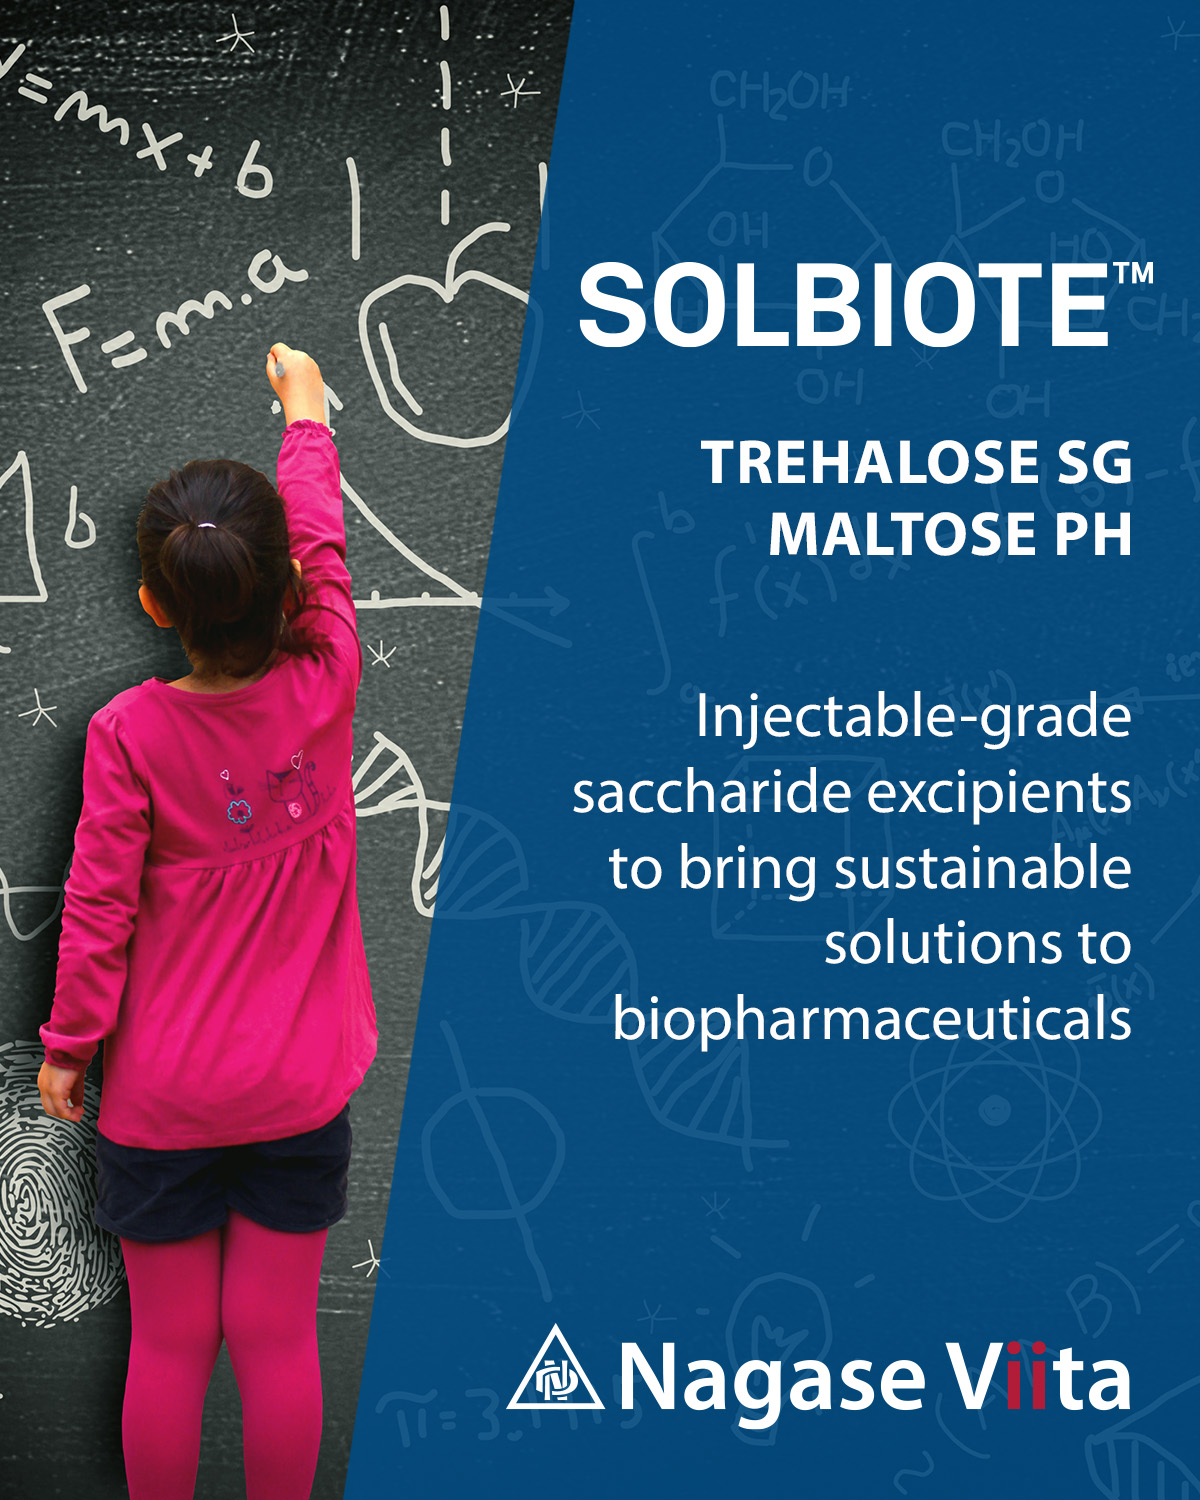 Solbiote - Injectable-grade saccharide excipients to bring sustainable solutions to biopharmaceuticals